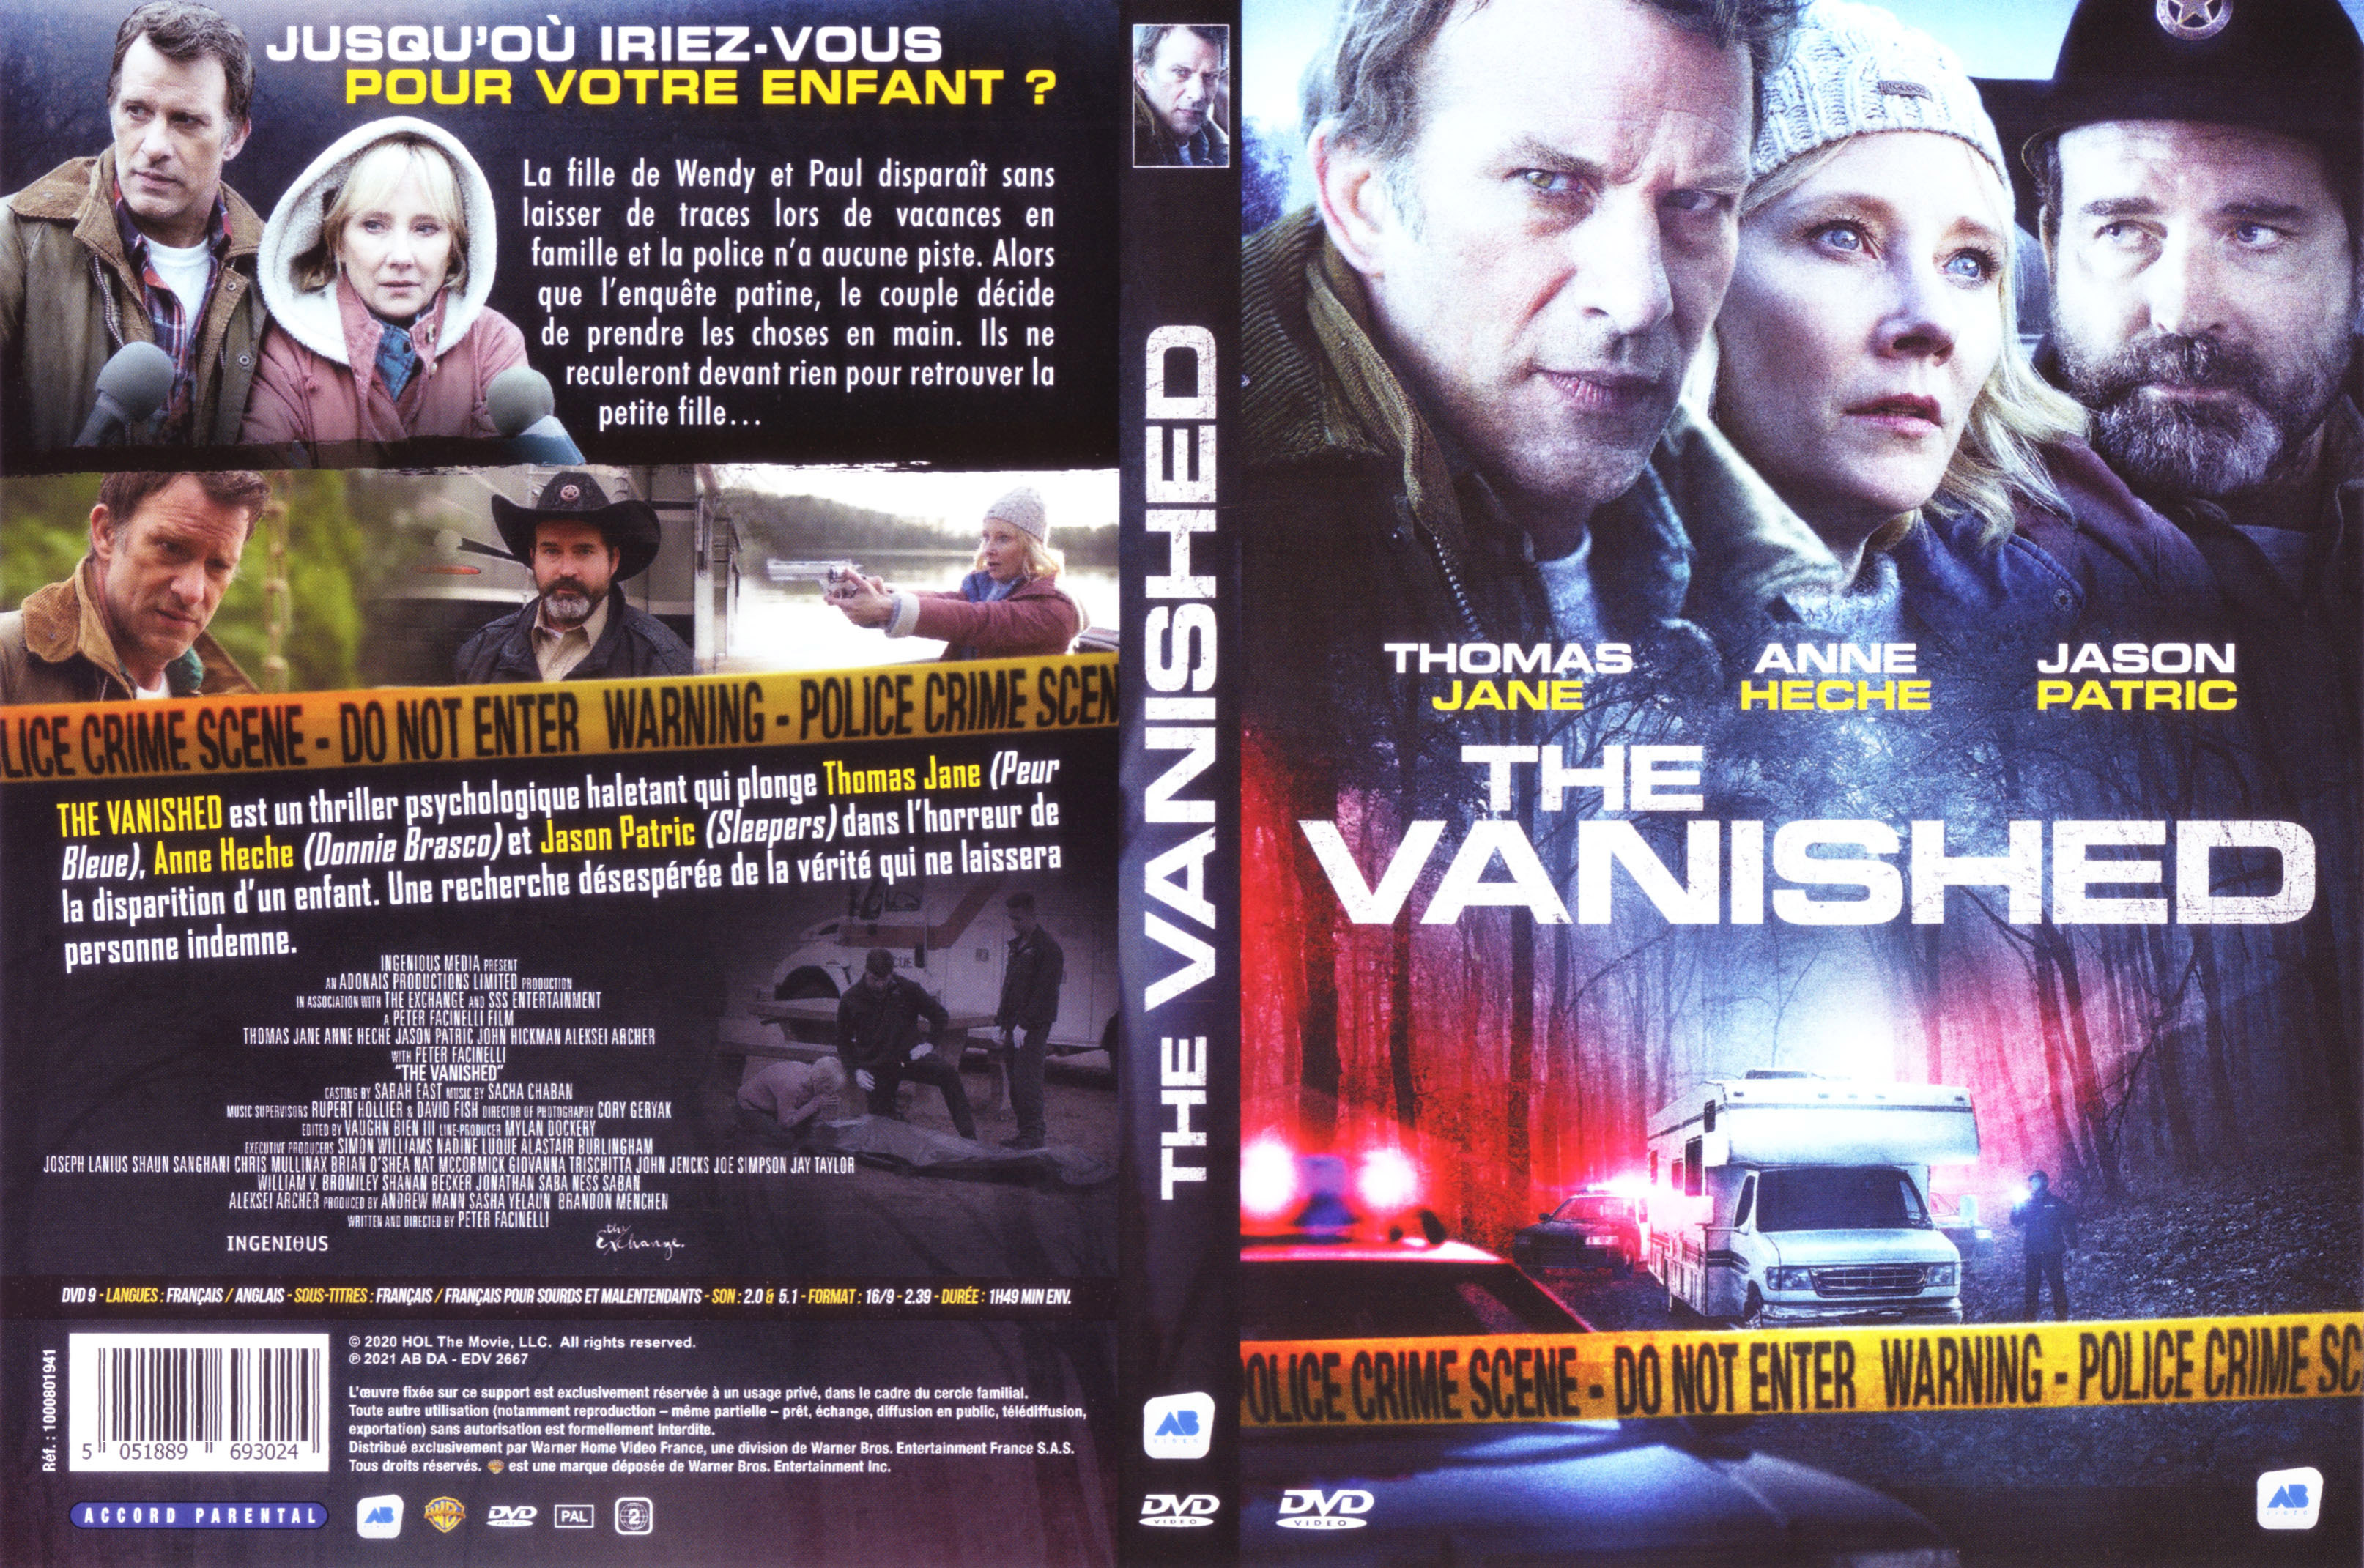 Jaquette DVD The vanished